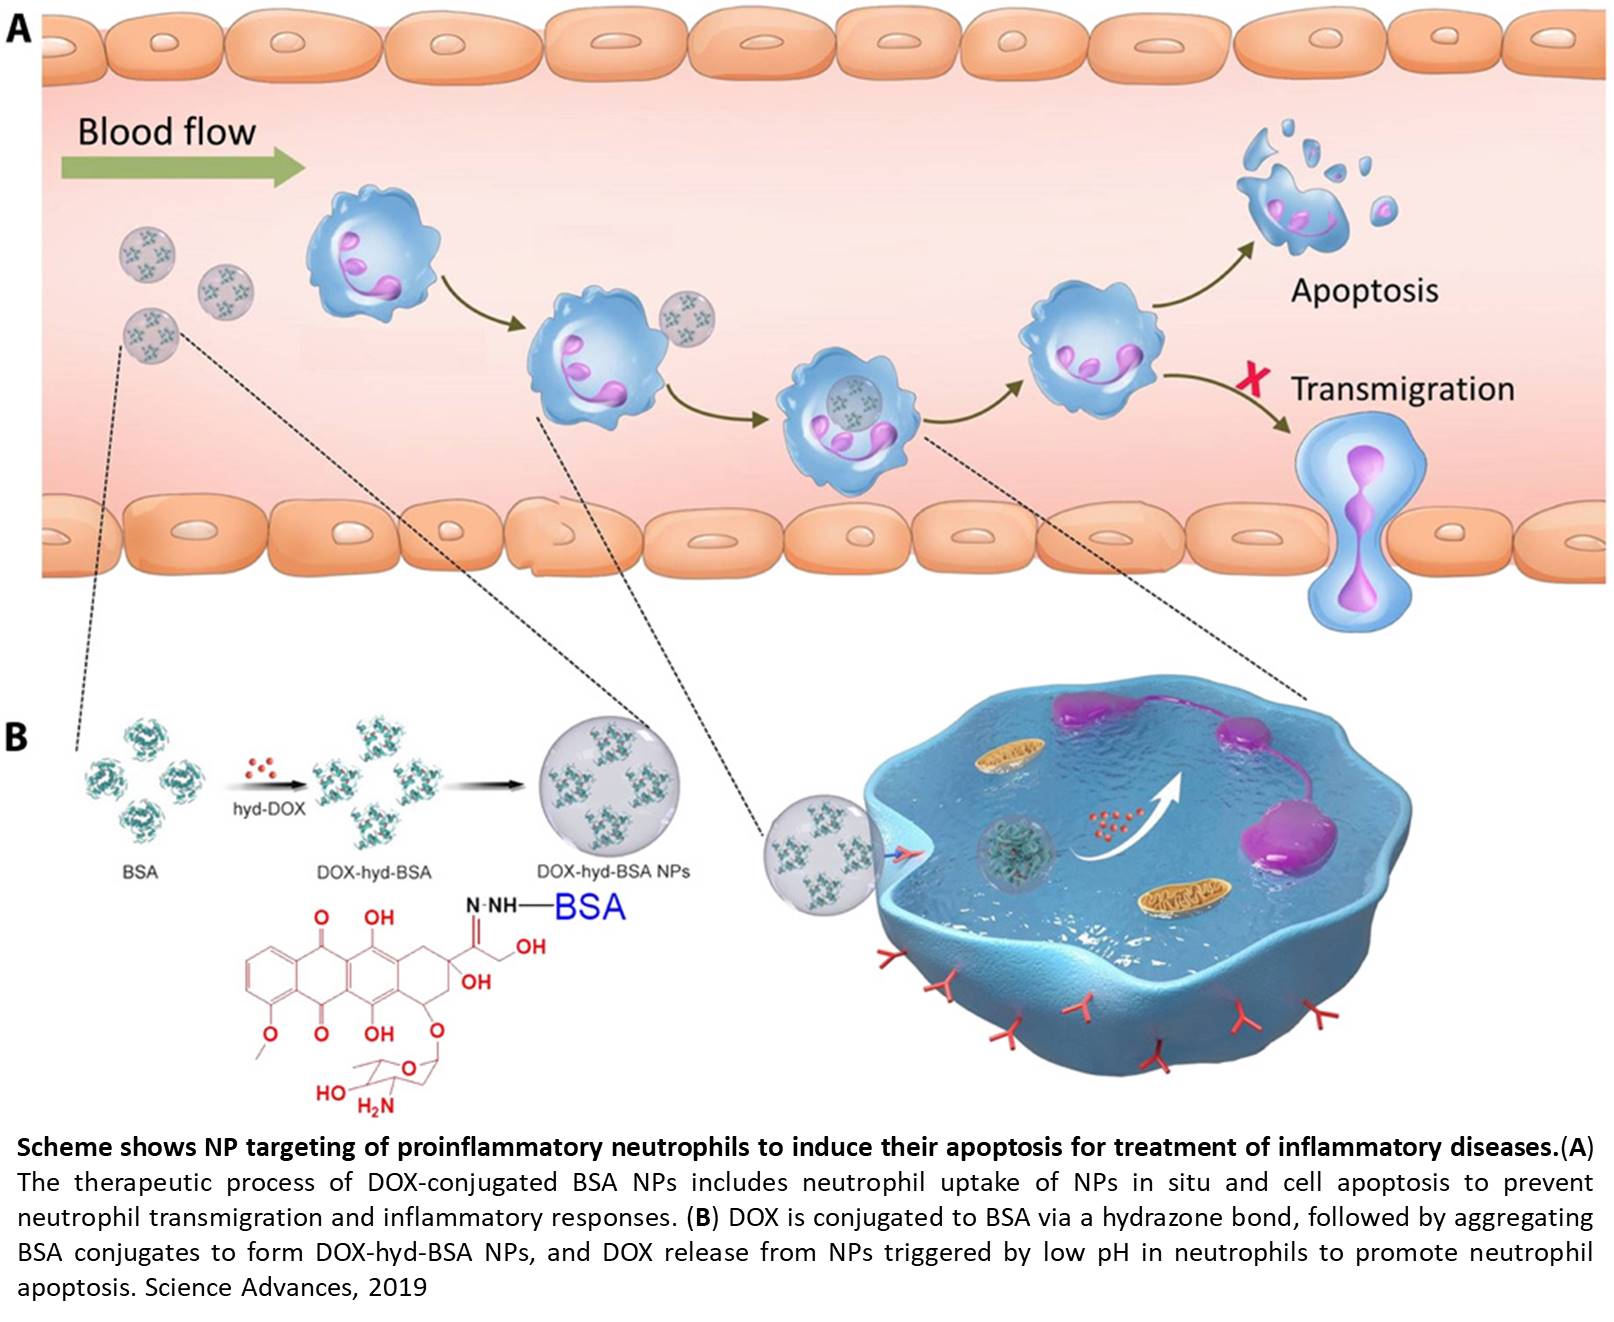 Nanoparticles targeting neutrophils to treat inflammatory diseases like sepsis and stroke